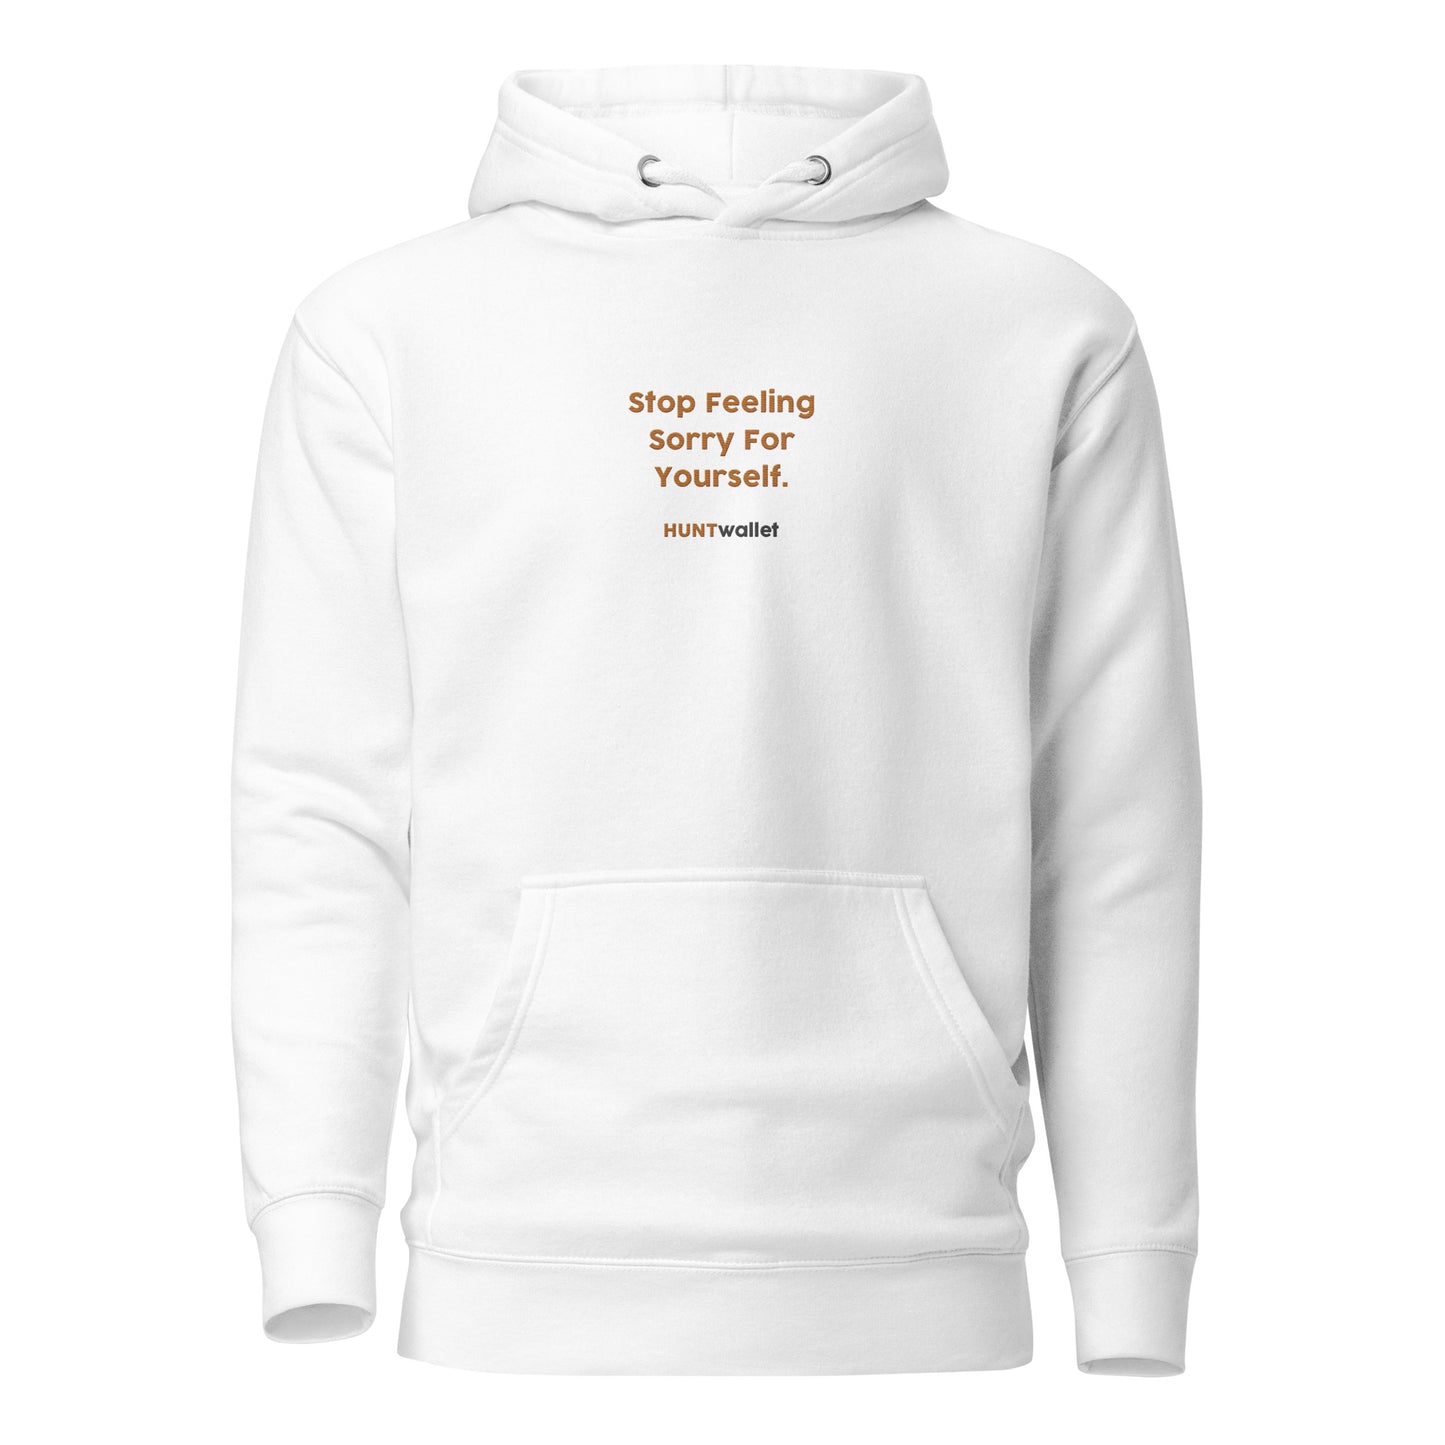 "Stop Feeling Sorry For Yourself" Embroidered Unisex Hoodie